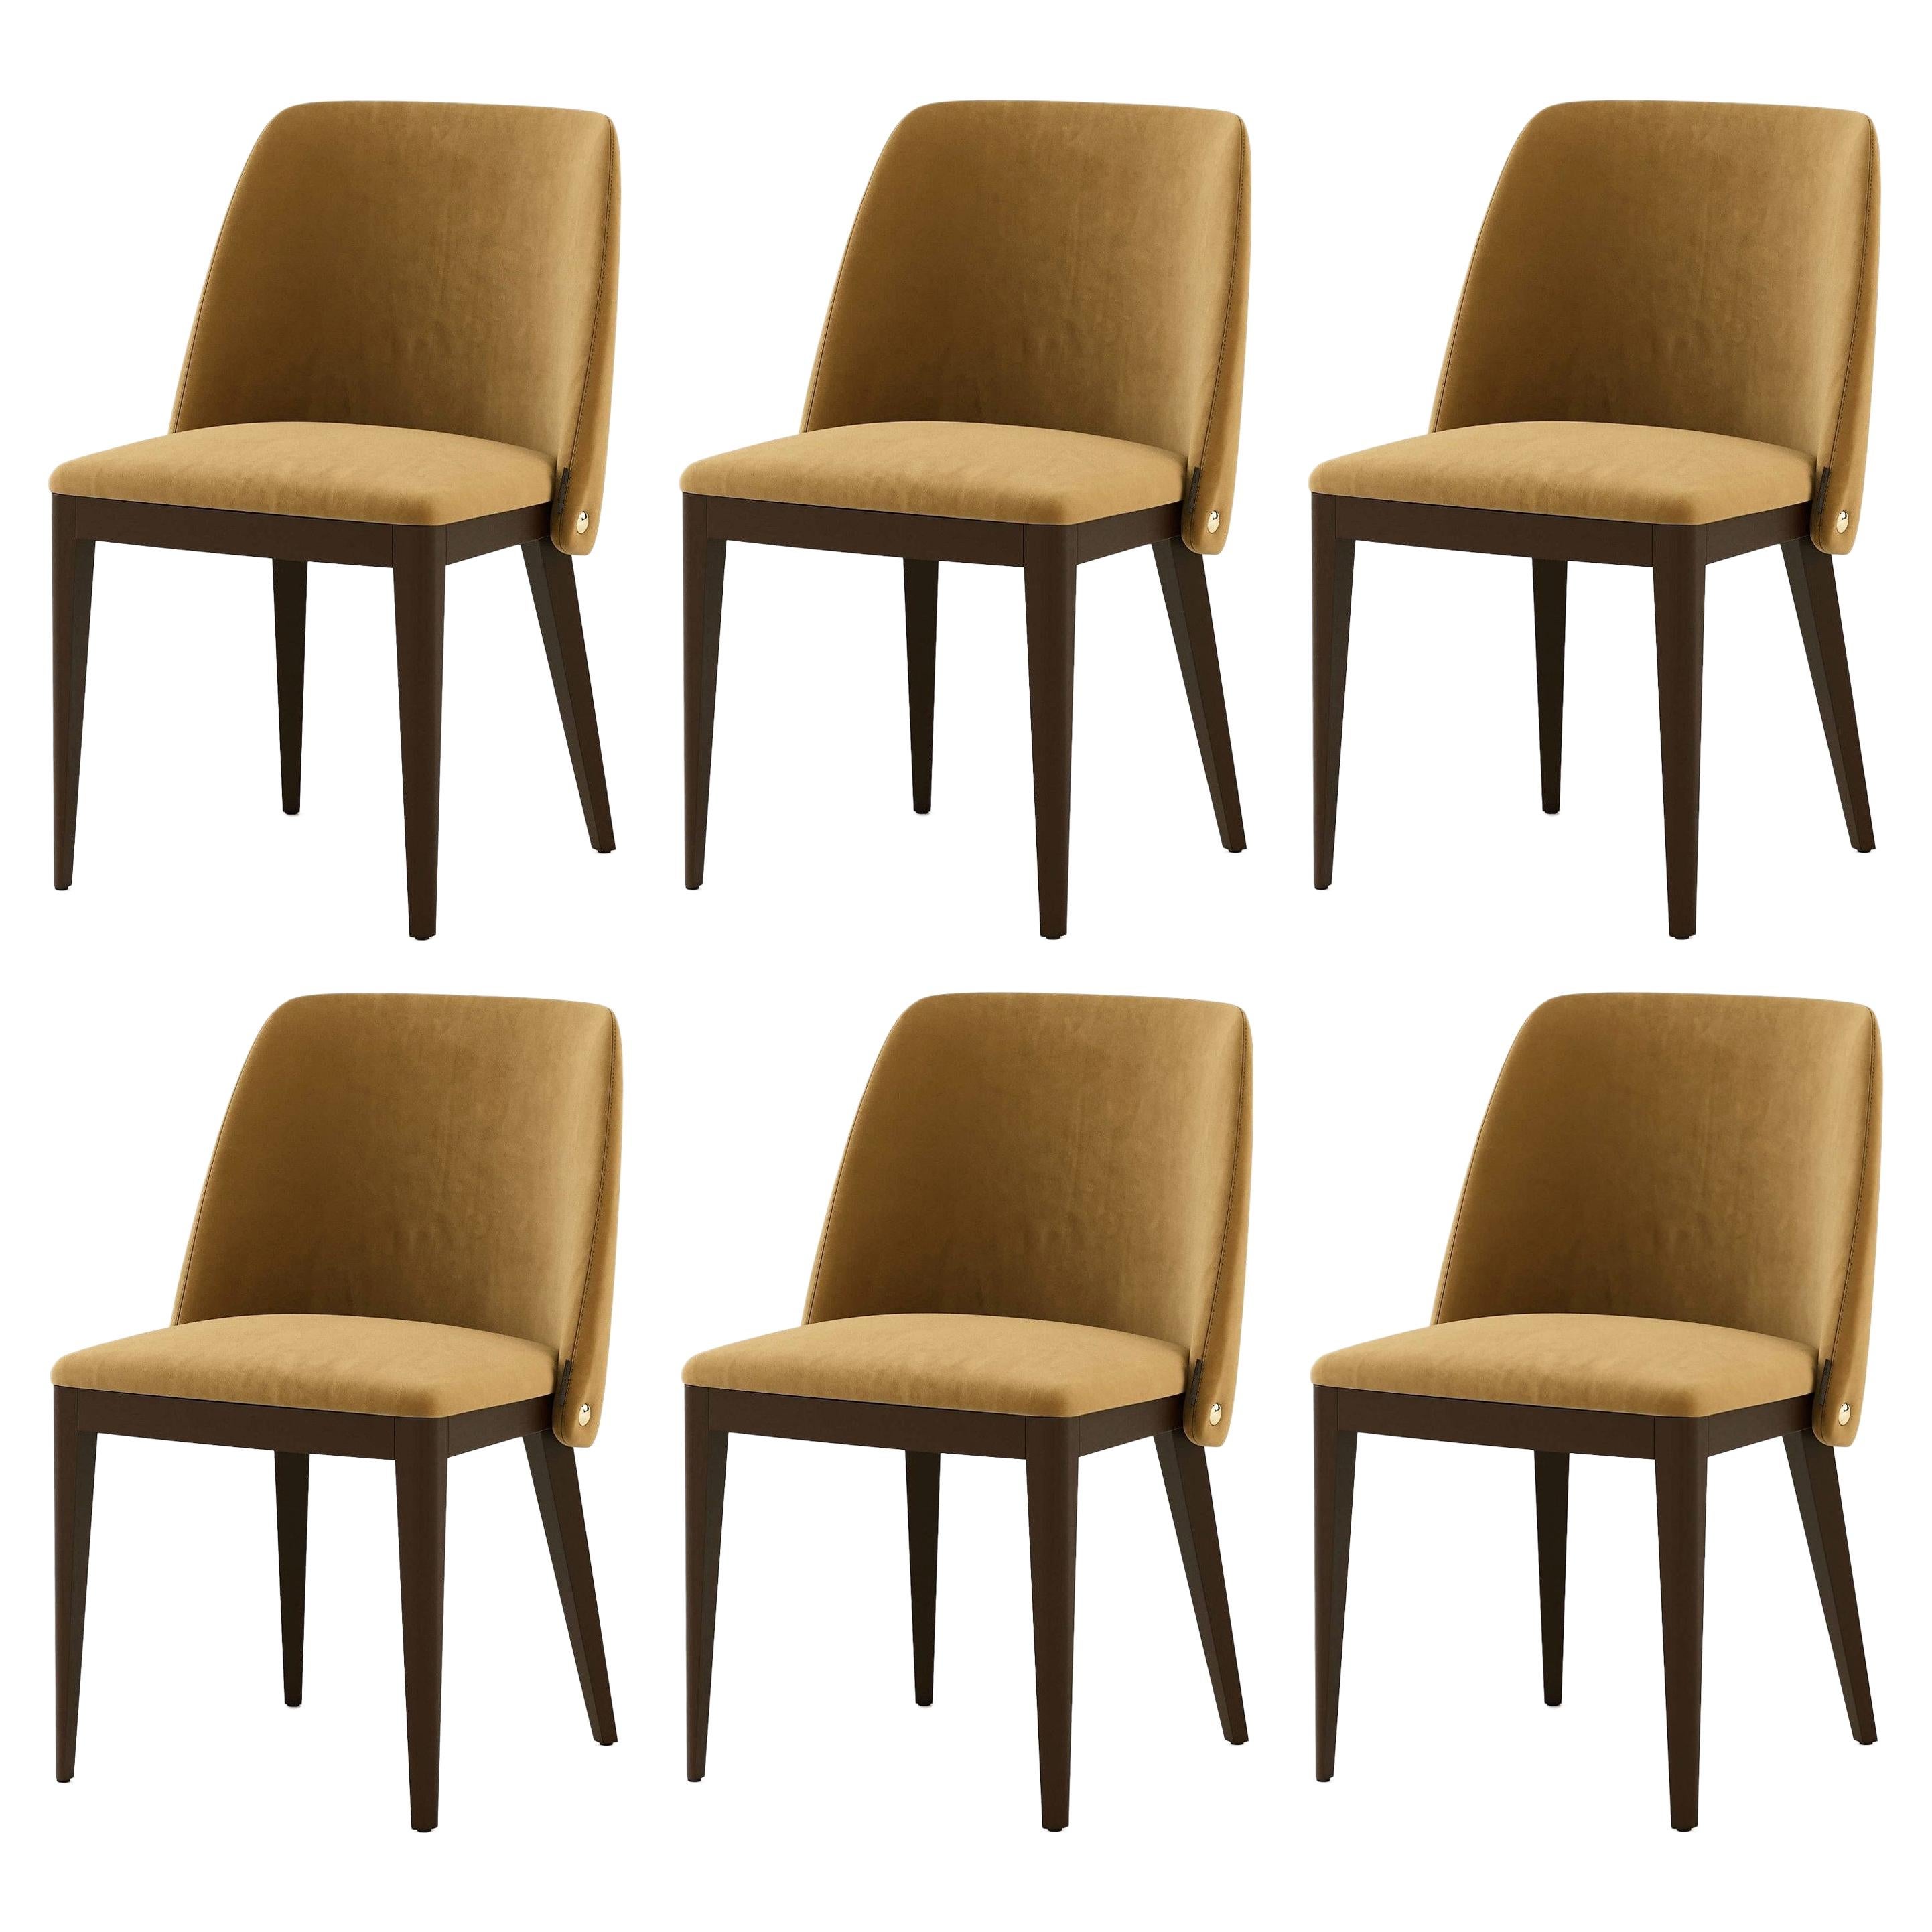 Sculptural design inspired by the work of Dutch architect Rem Koolhaas. 
Standard finishes
Fabrics: mud velvet
Structure: black oak
Studs: Gold.
“Minimum order of 4 chairs.”
Contact us to enquire about COM/COL production, requirements and material